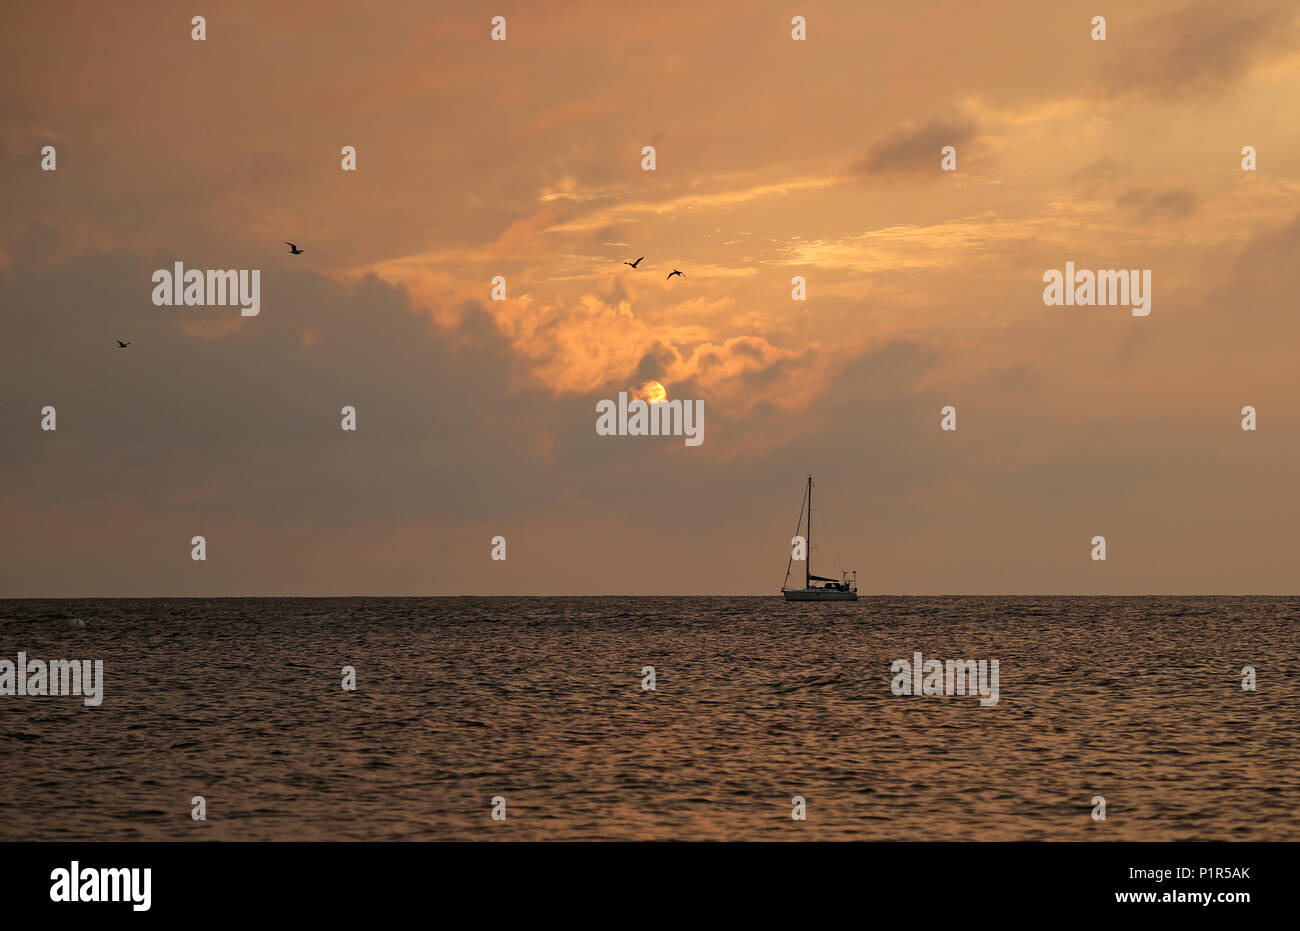 Kuehlungsborn, Germany, sailboat in the morning on the Baltic Sea Stock Photo